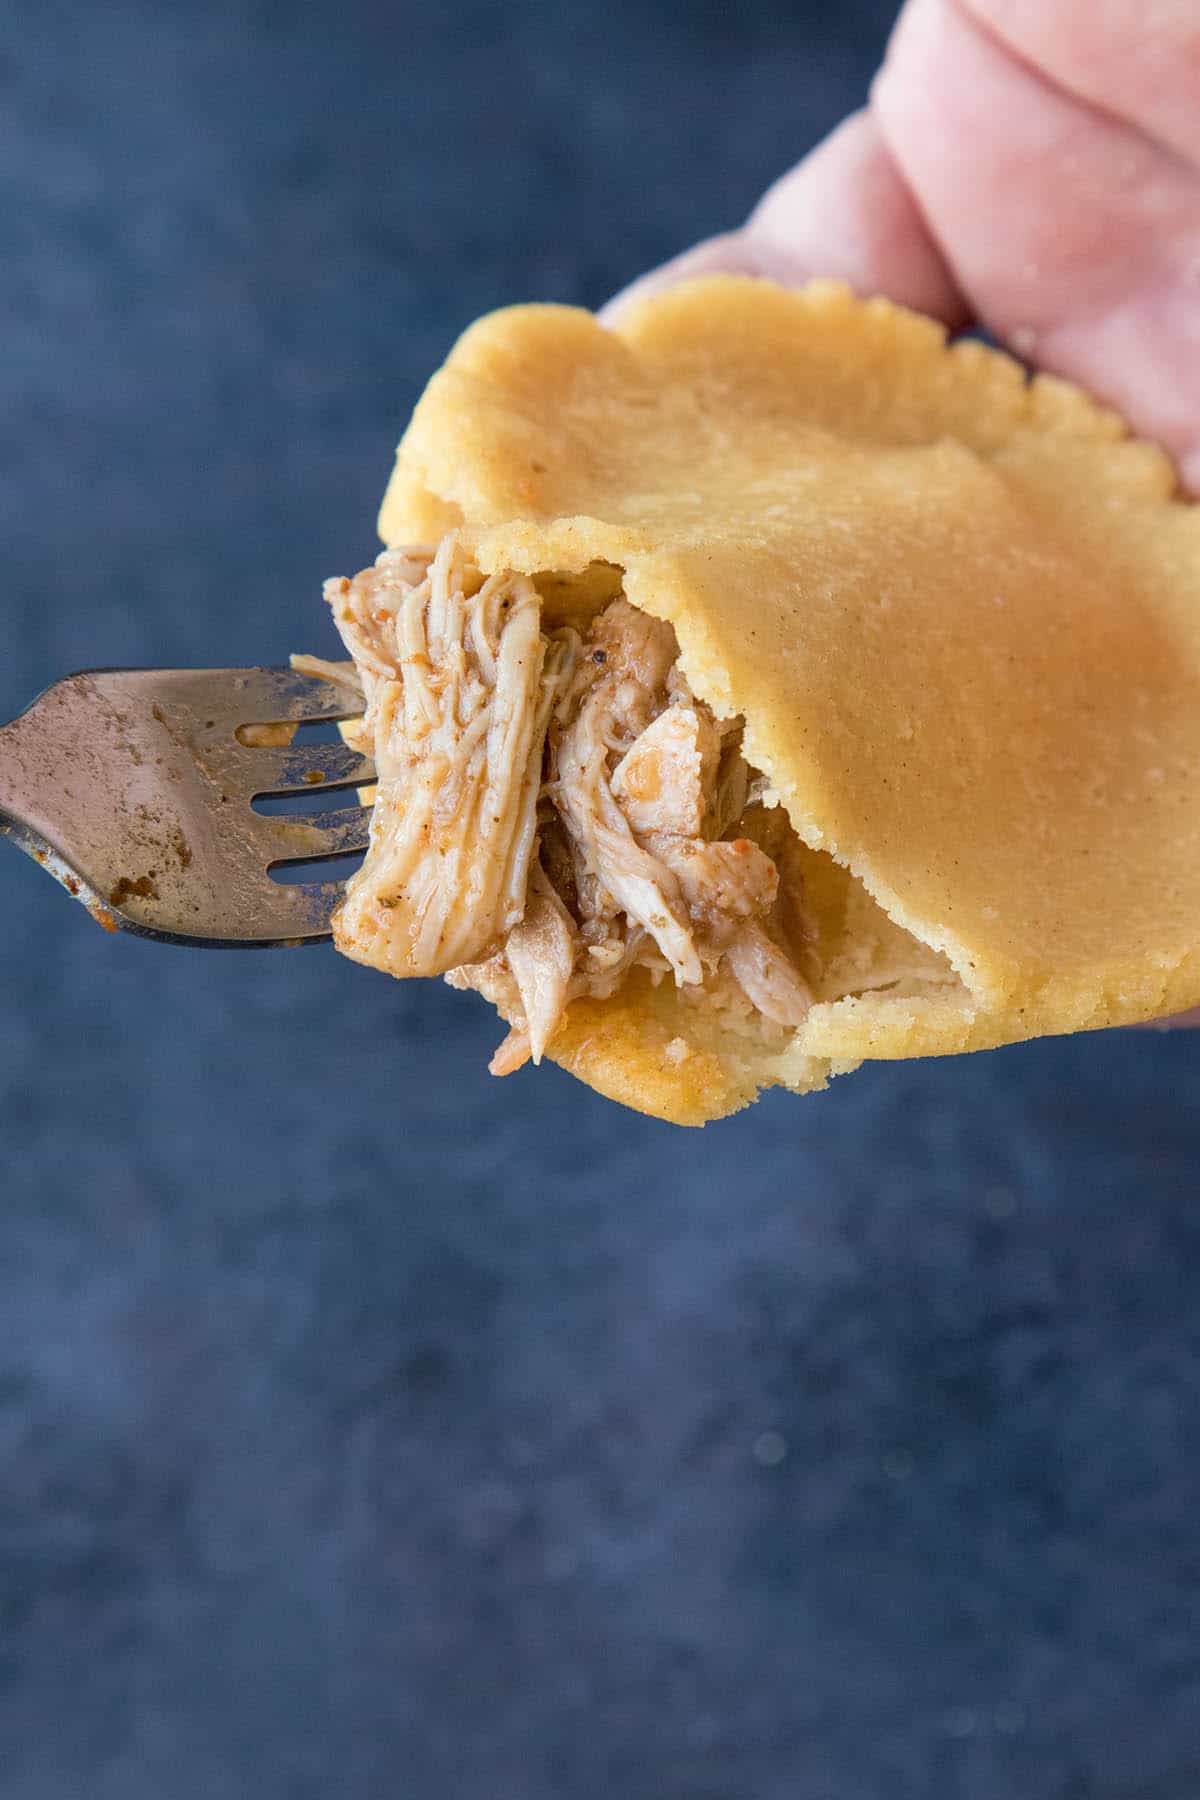 Stuffing a Mexican Gordita with delicious pulled chicken